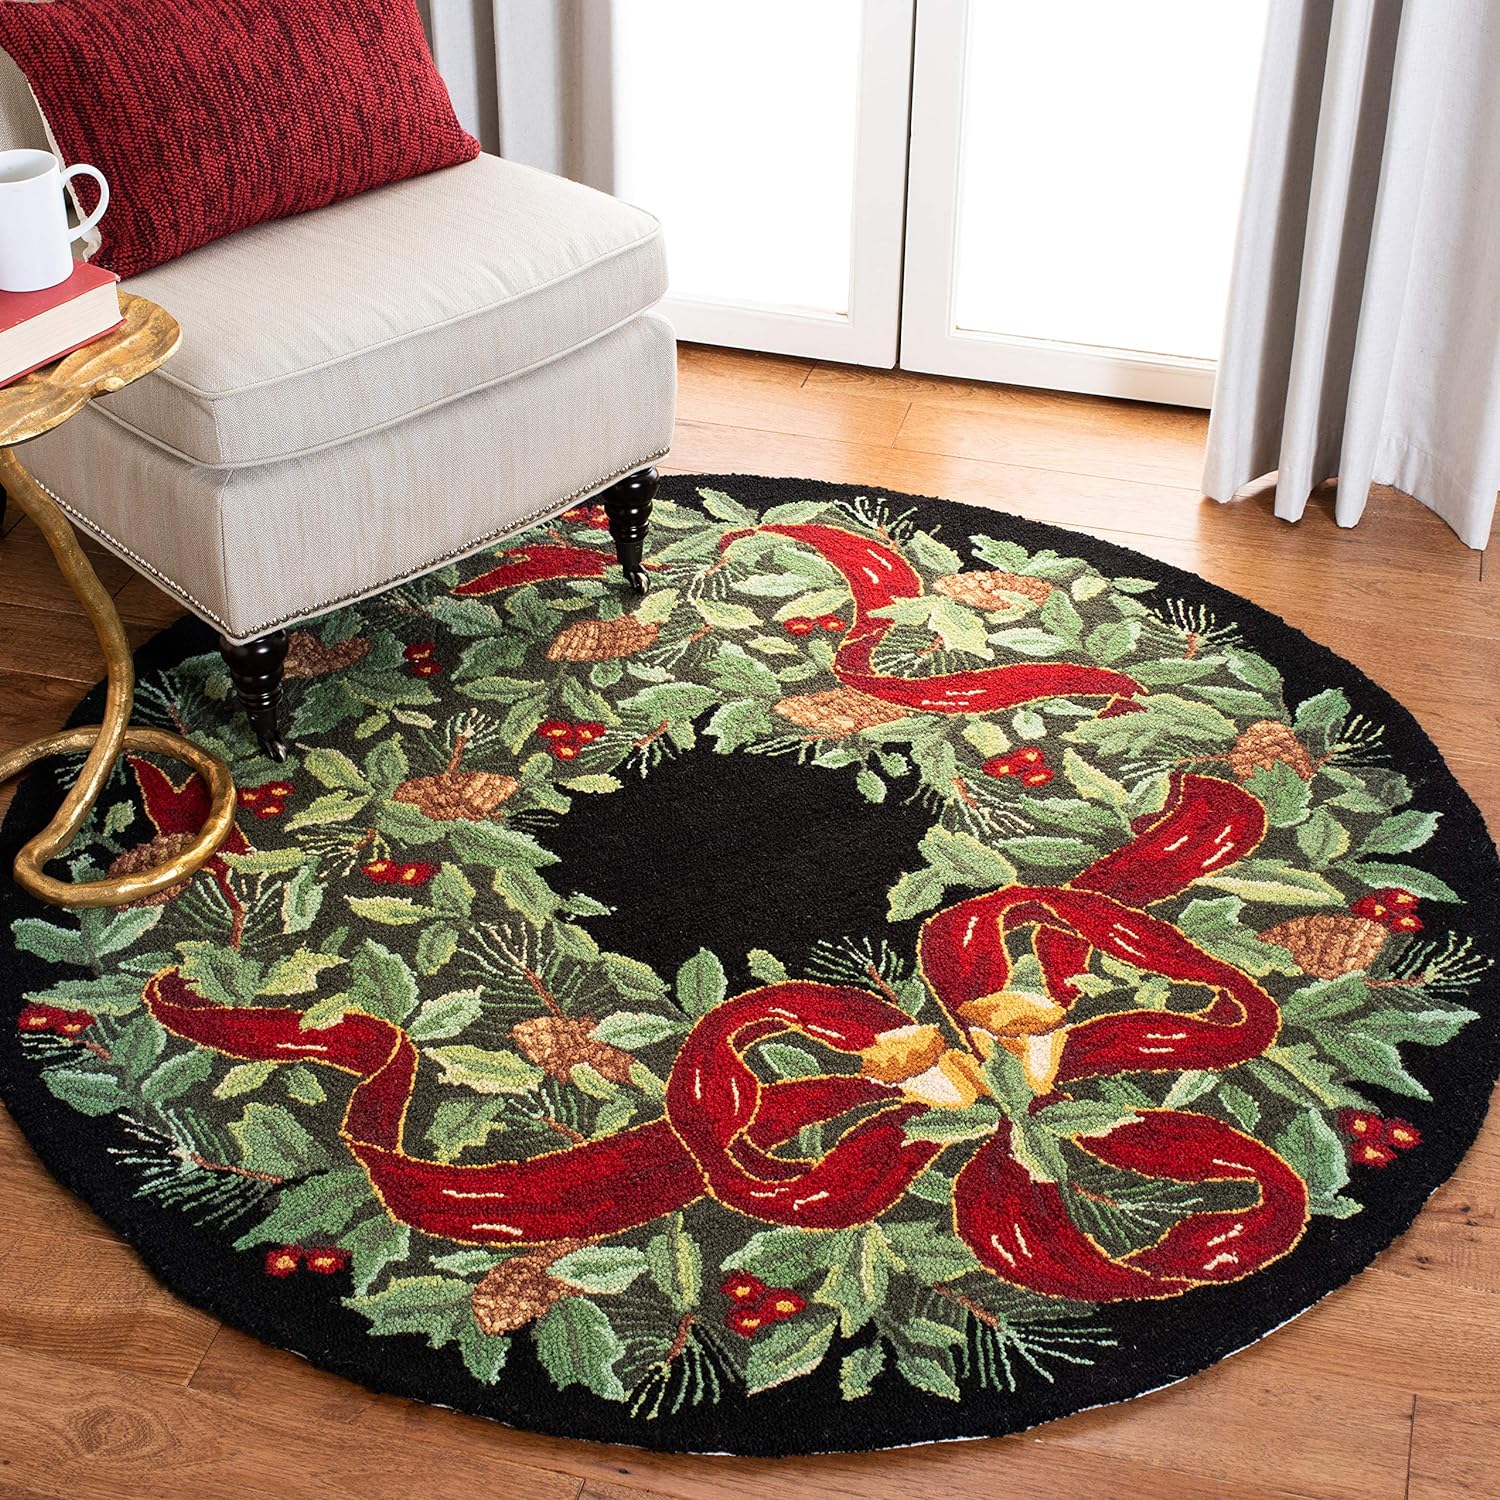 SAFAVIEH Vintage Poster Collection Area Rug - 5' Round, Black & Green, Handmade Christmas Wreath Novelty Wool, Ideal for…